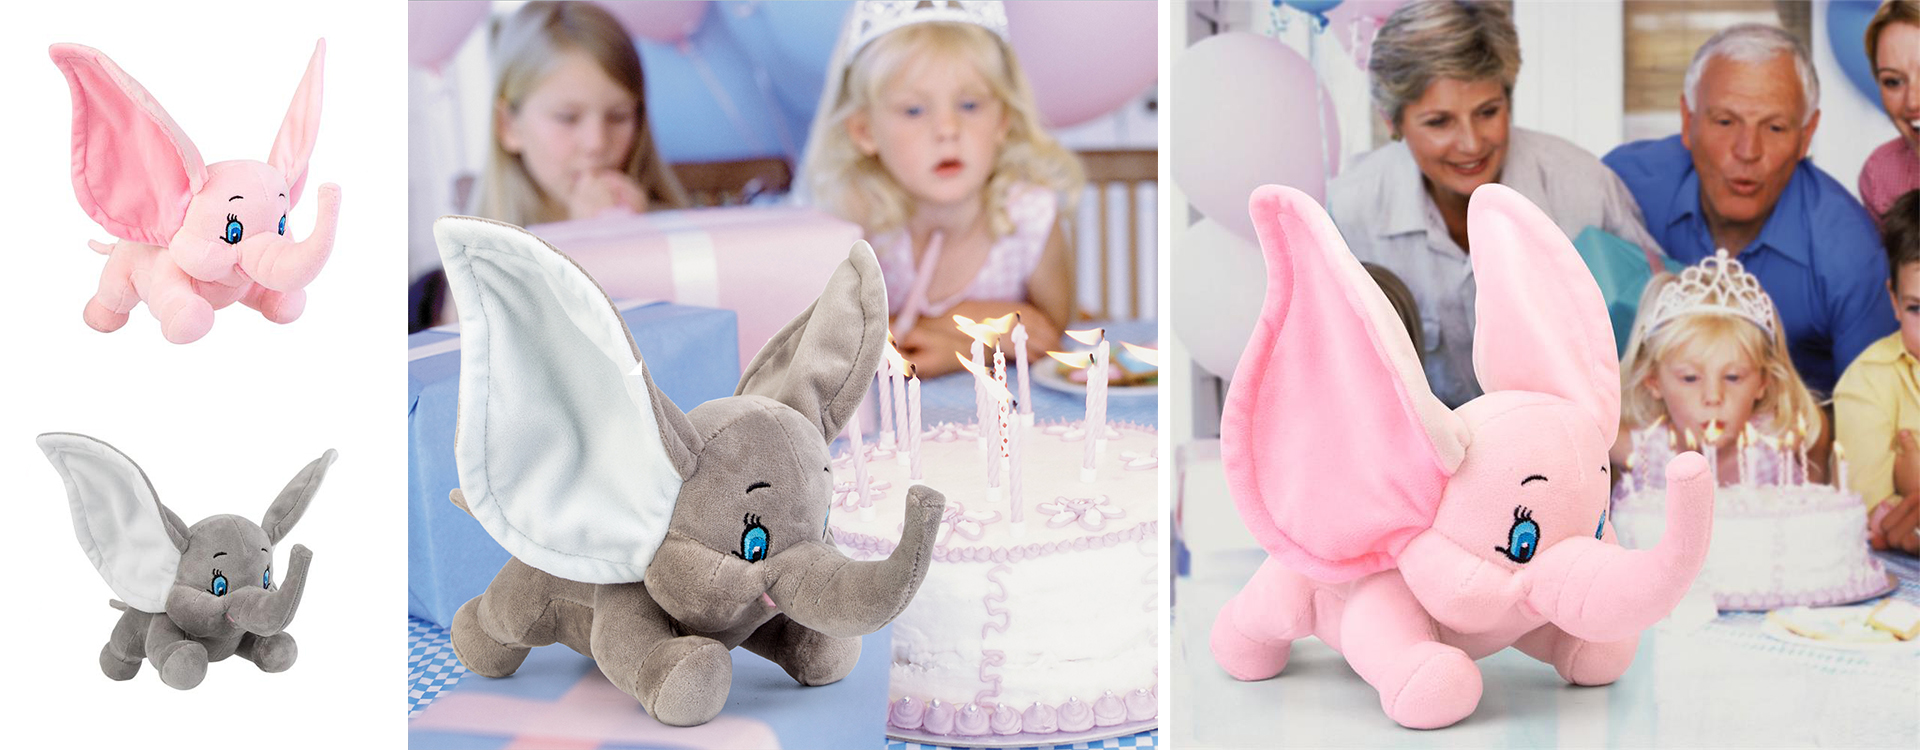 fluffy small elephants is a best holiday gifts for childs